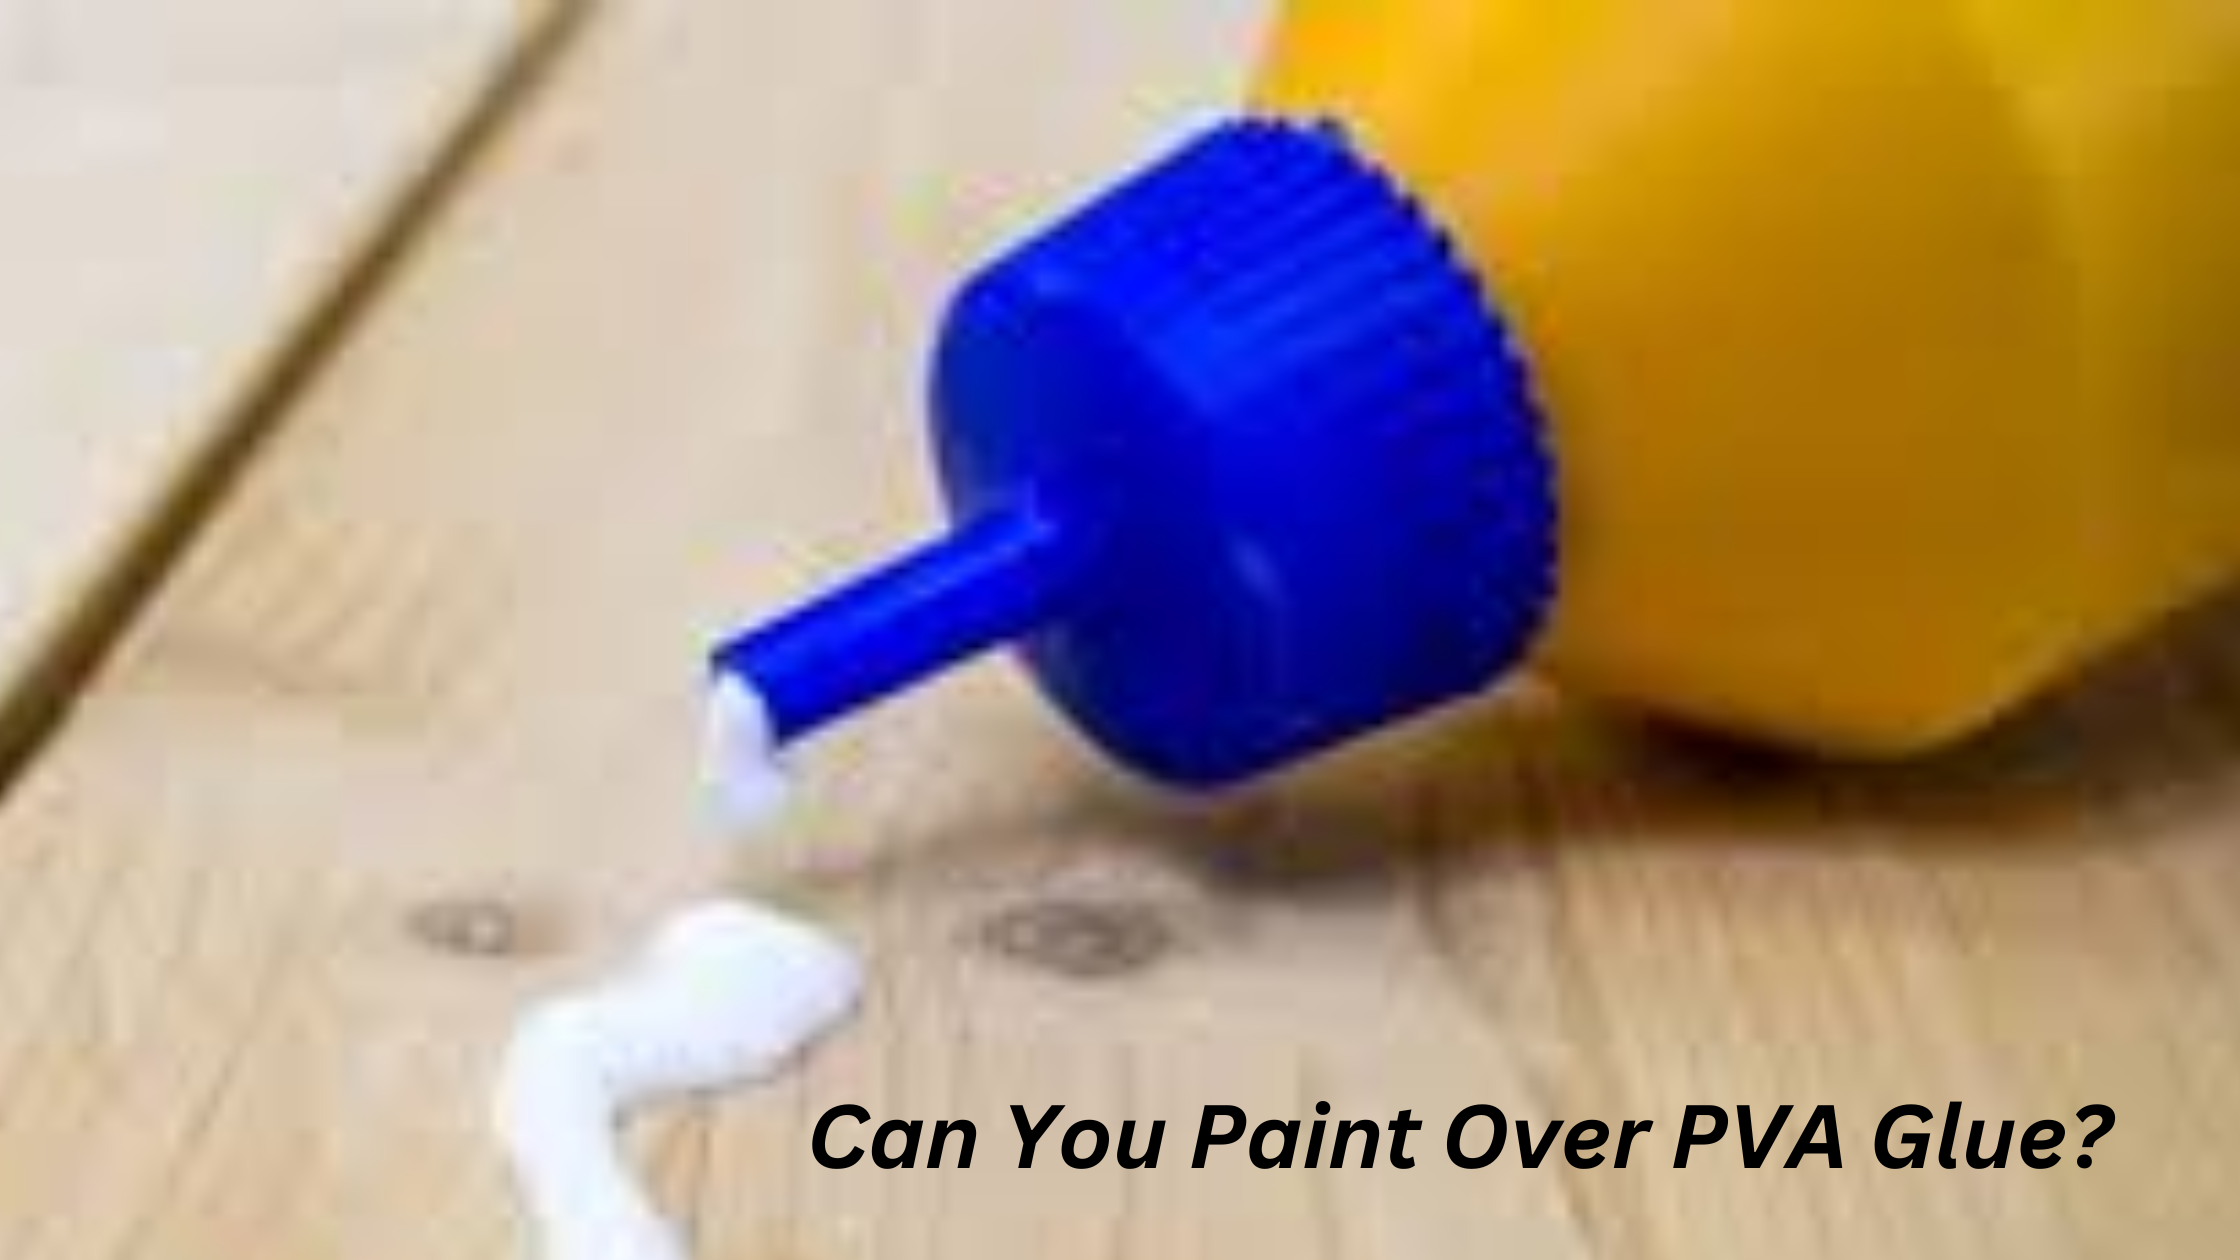 Can You Paint Over PVA Glue?